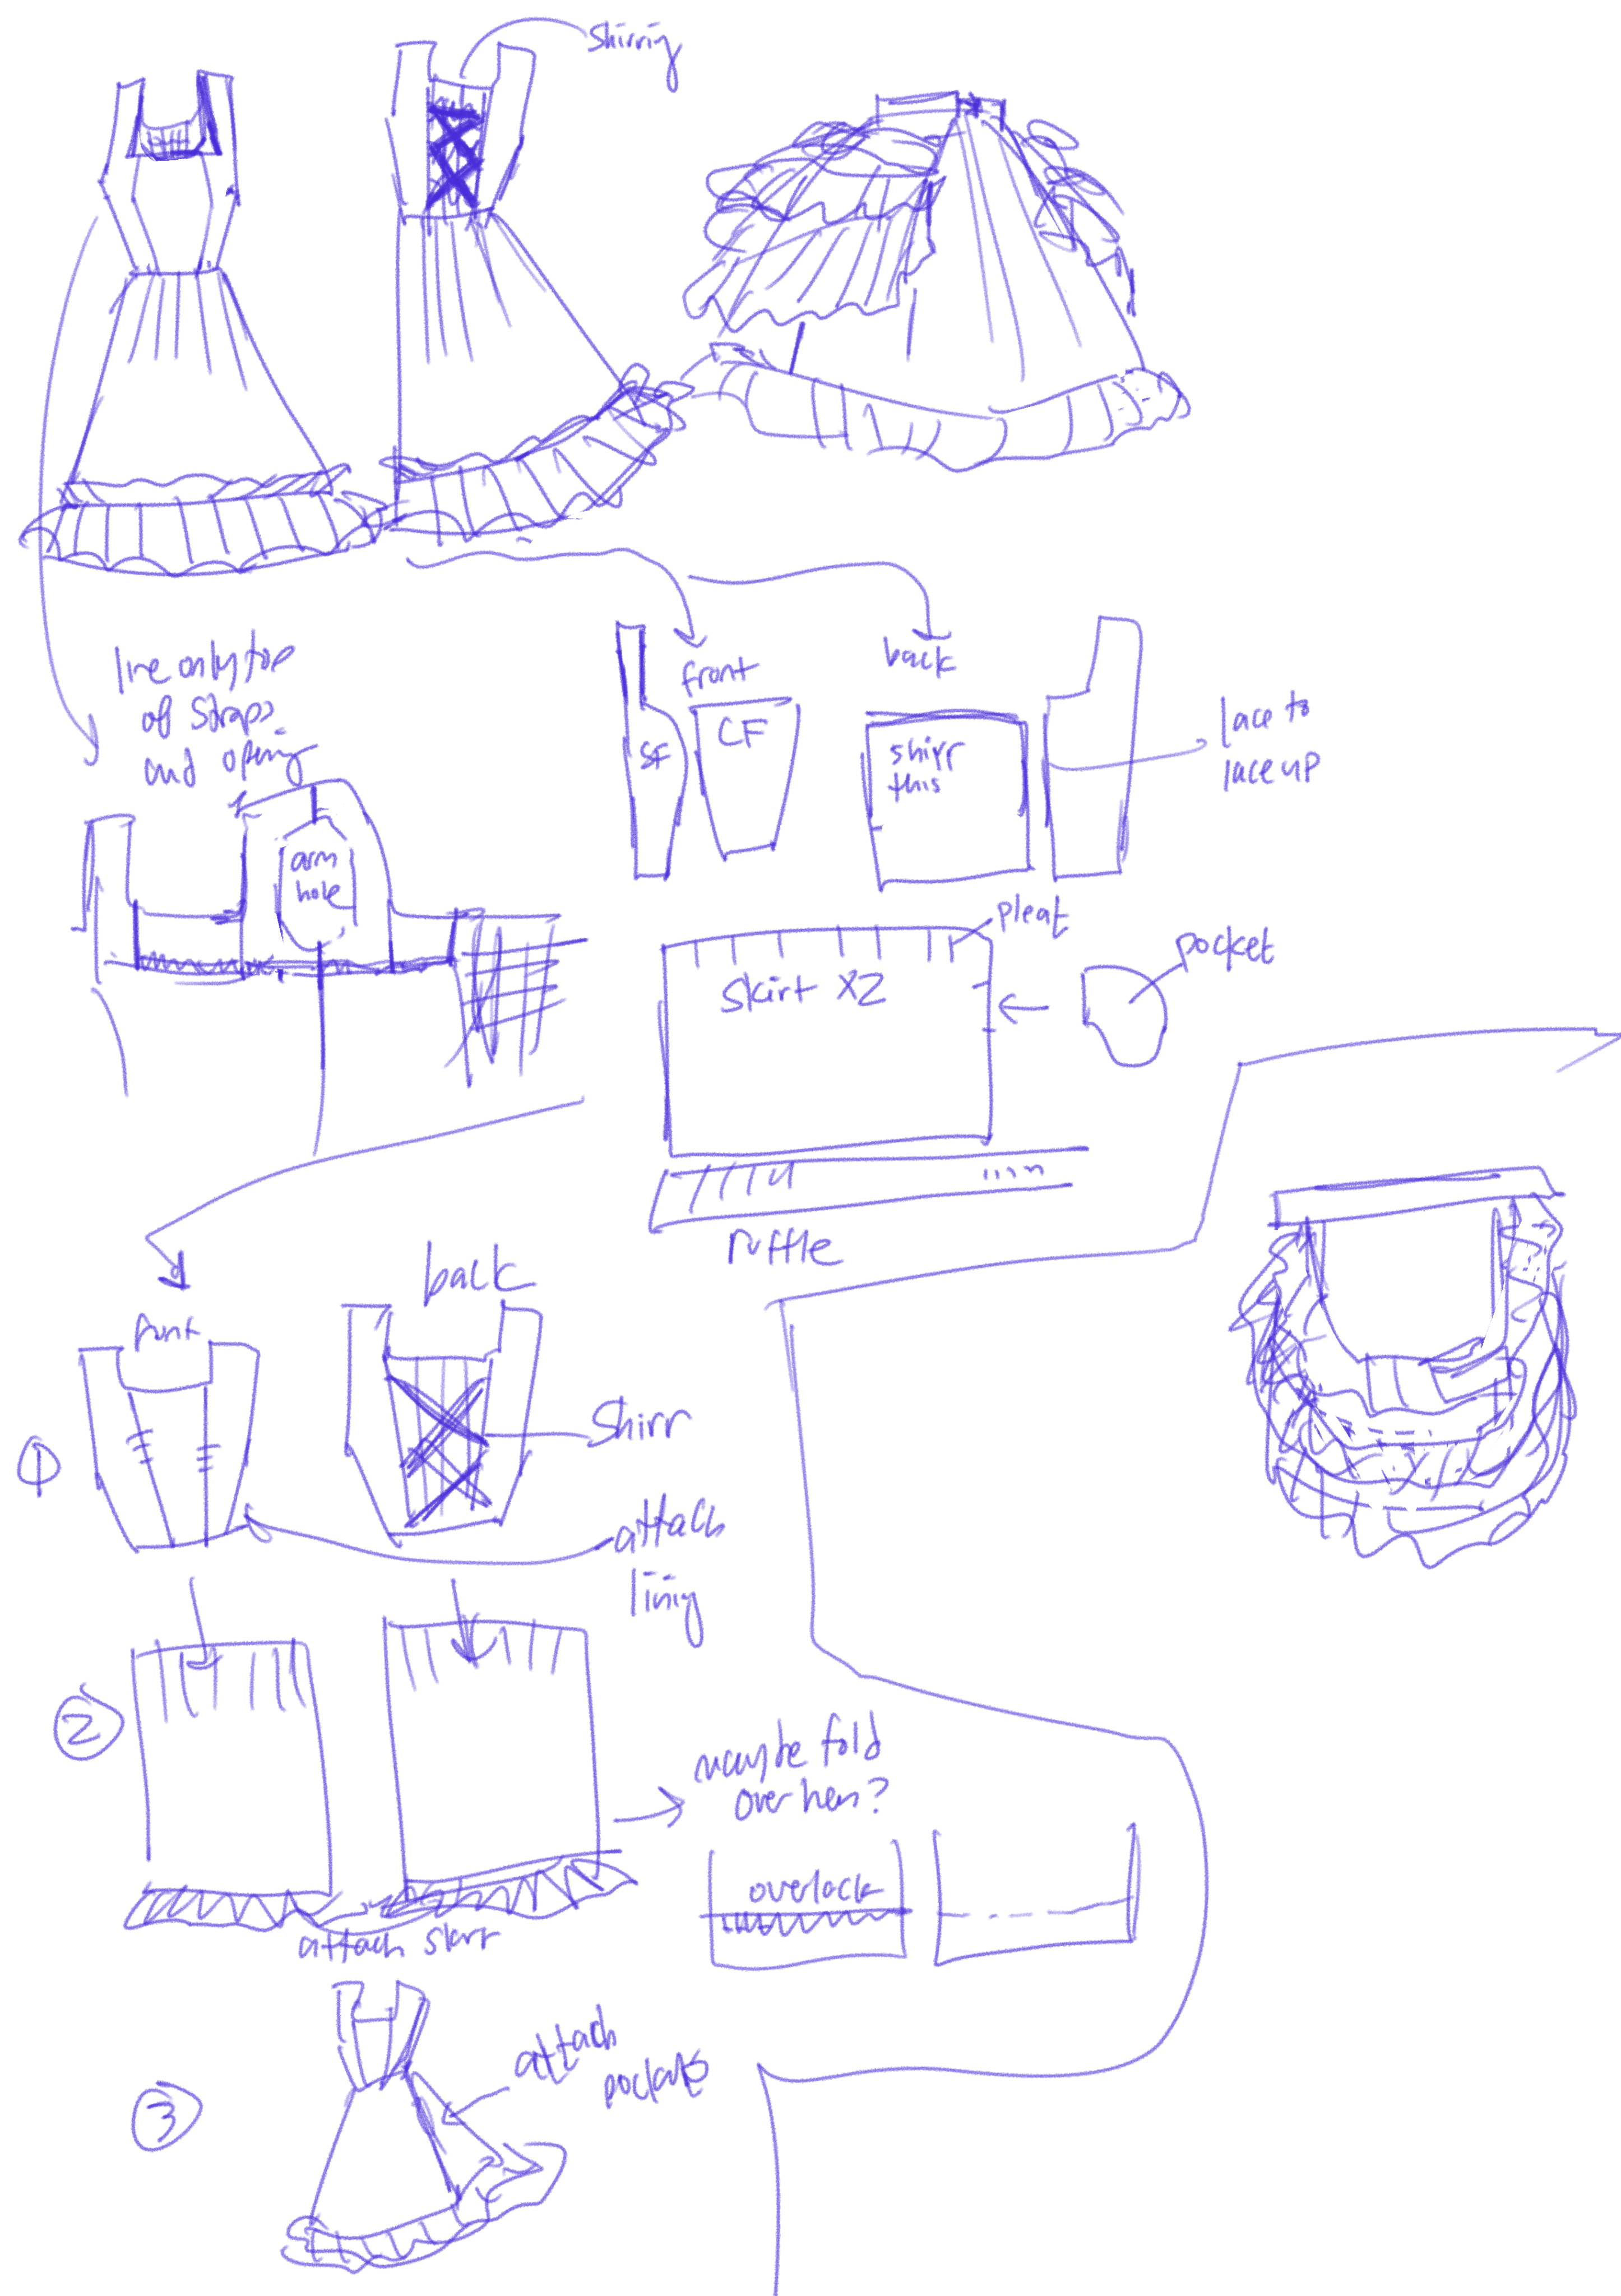 Sketches of ideas for how to construct the JSK and overskirt